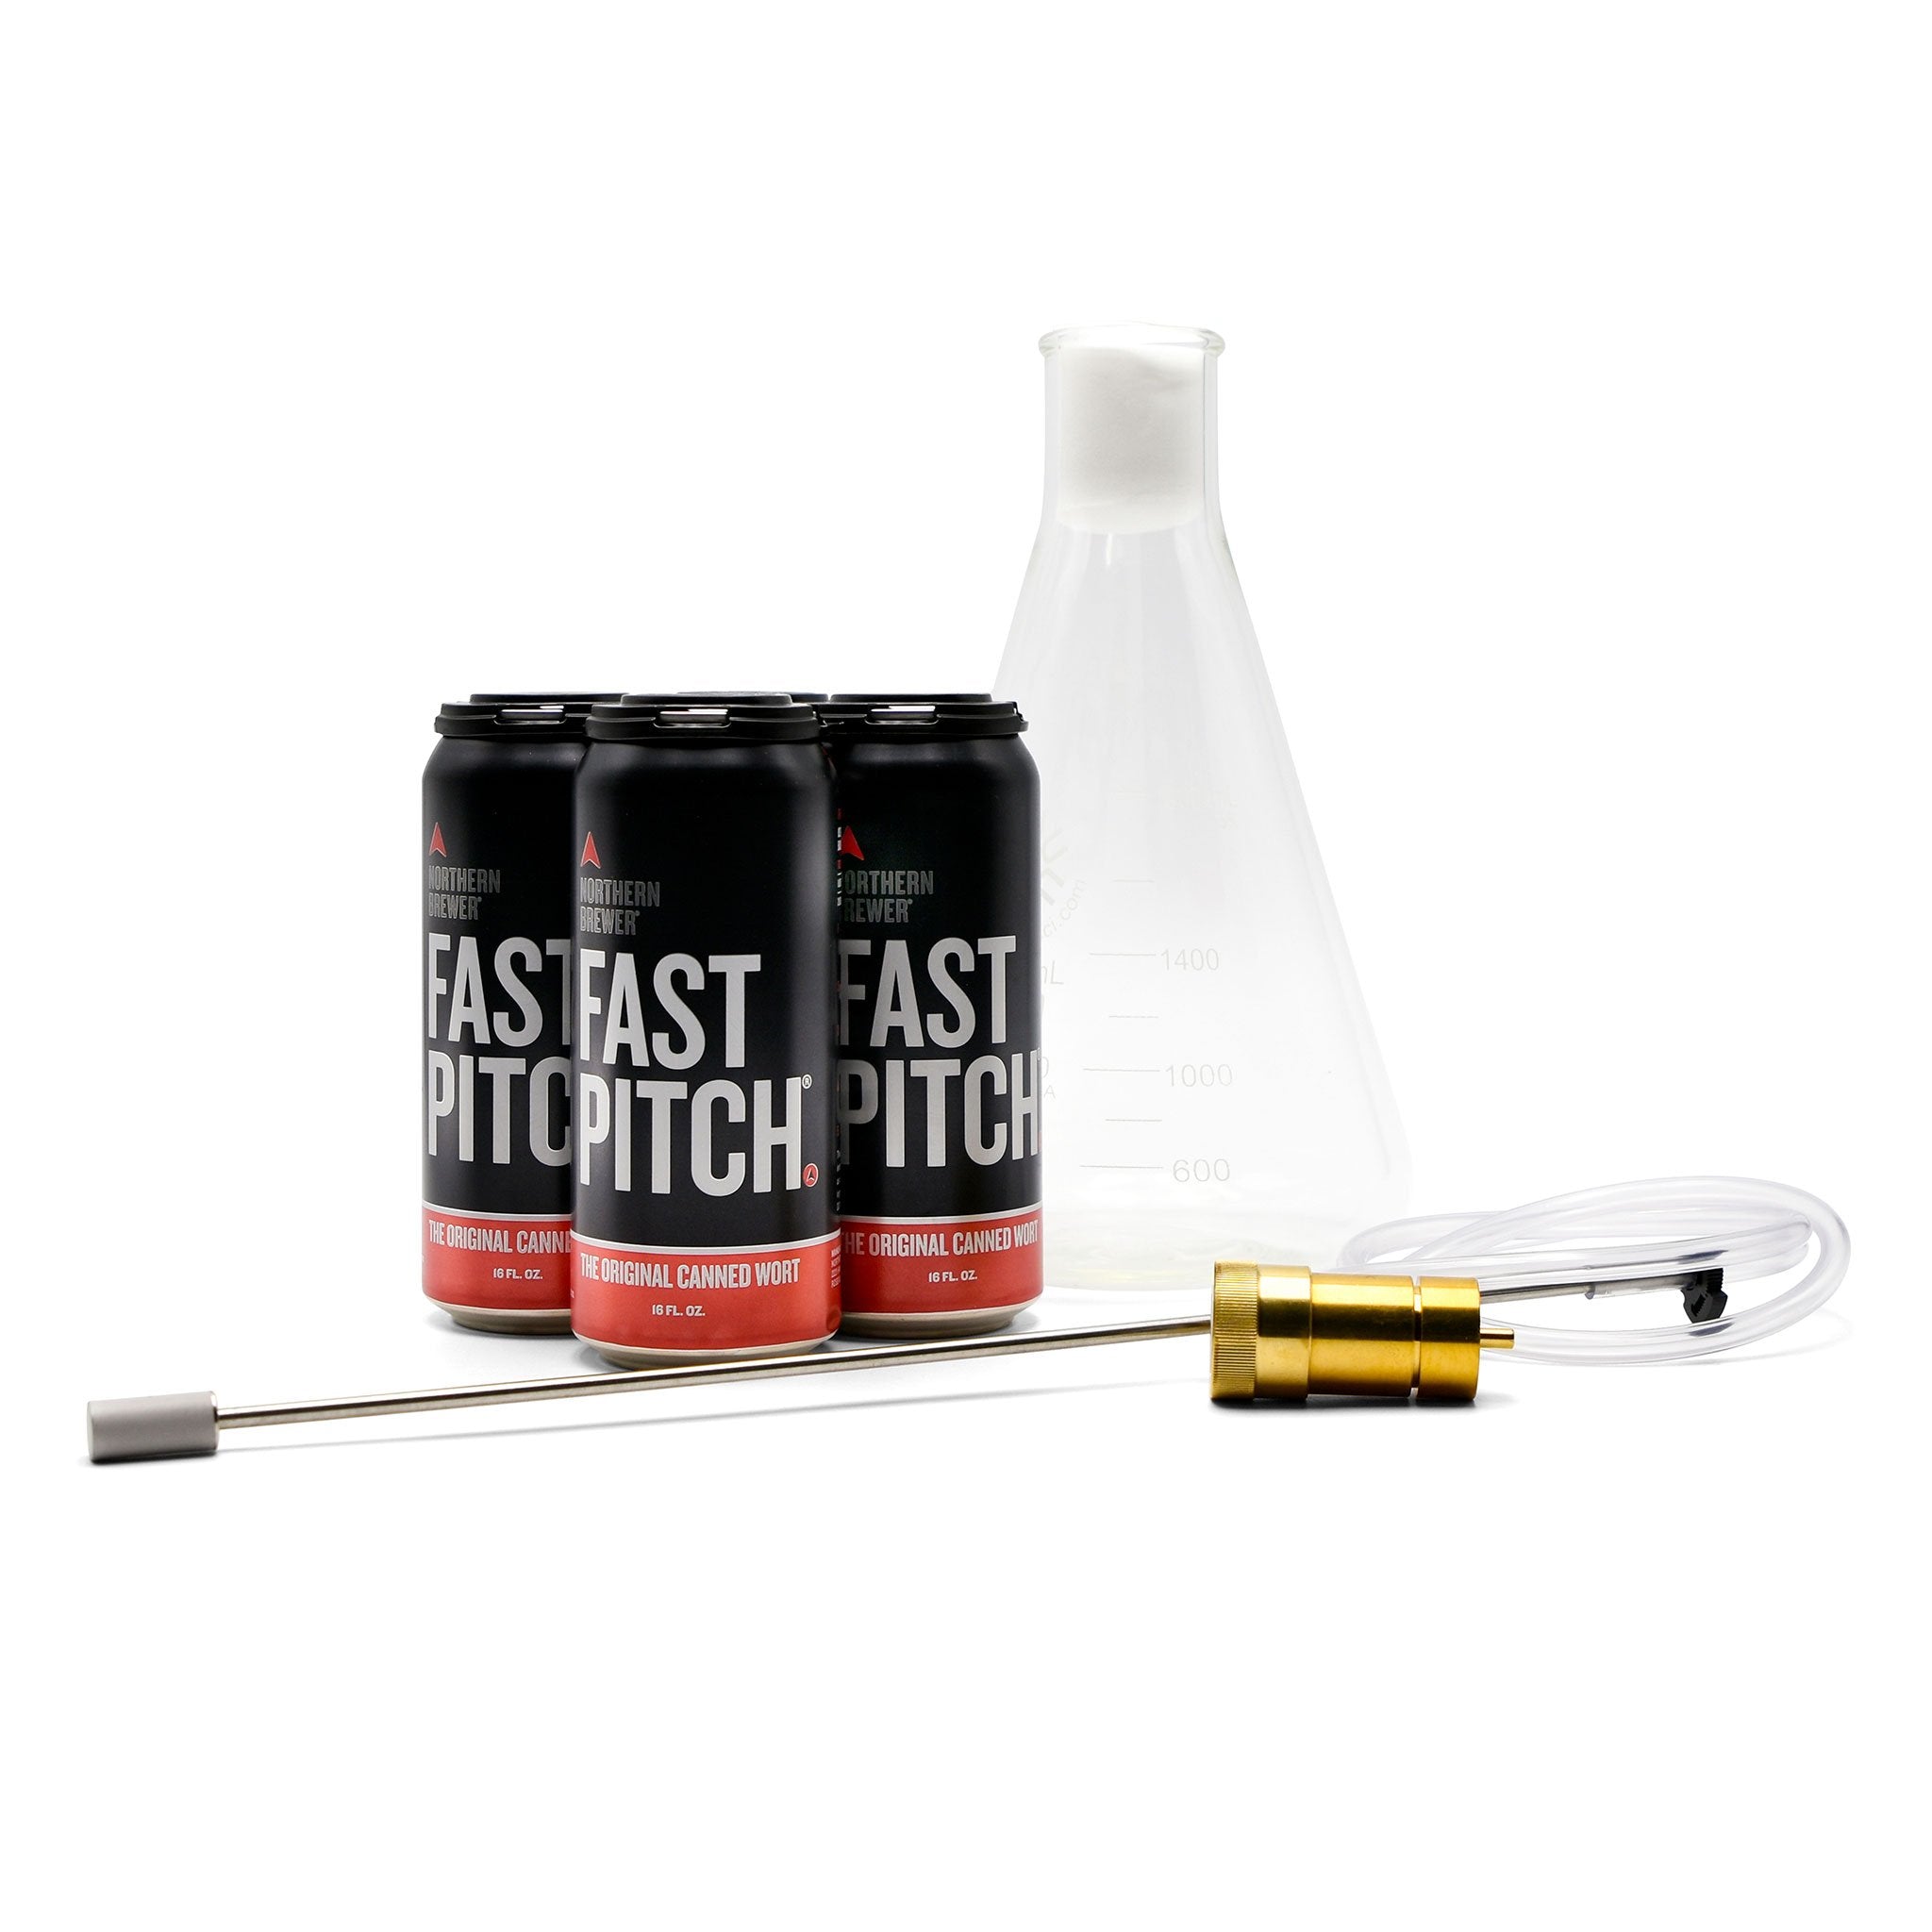 Fast Pitch® Canned Wort - 4 Pack